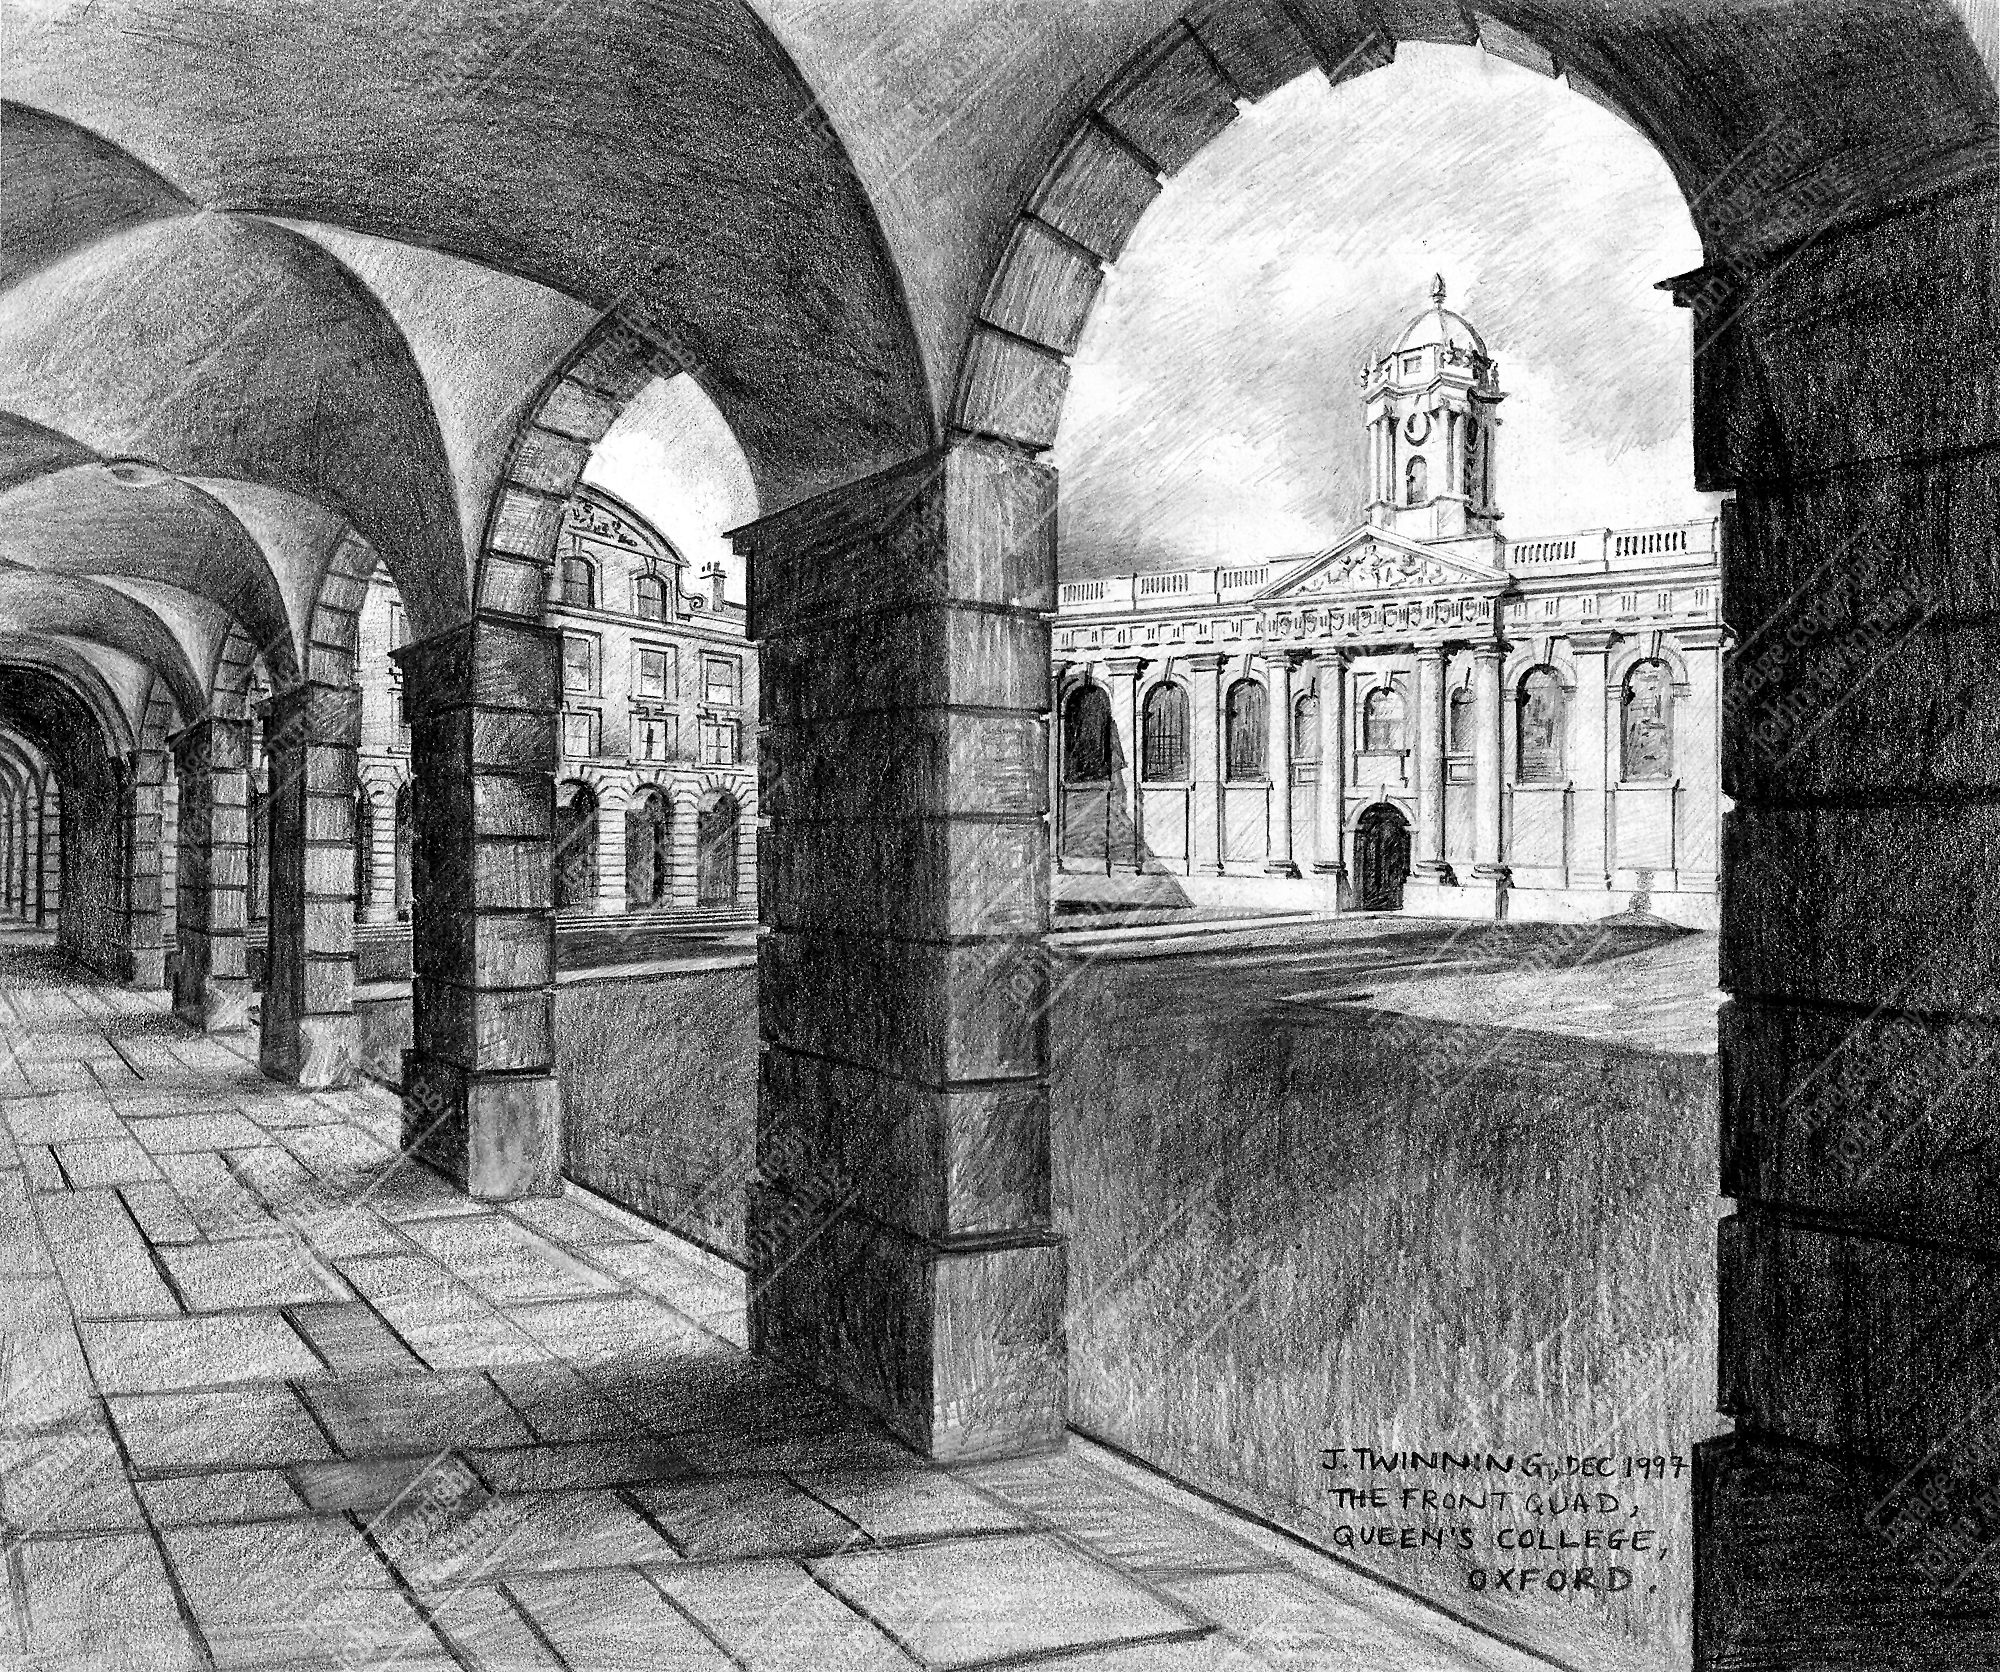 ‘The Front Quad’ – art print from a pencil drawing of this view within the grounds of the queen’s college, oxford